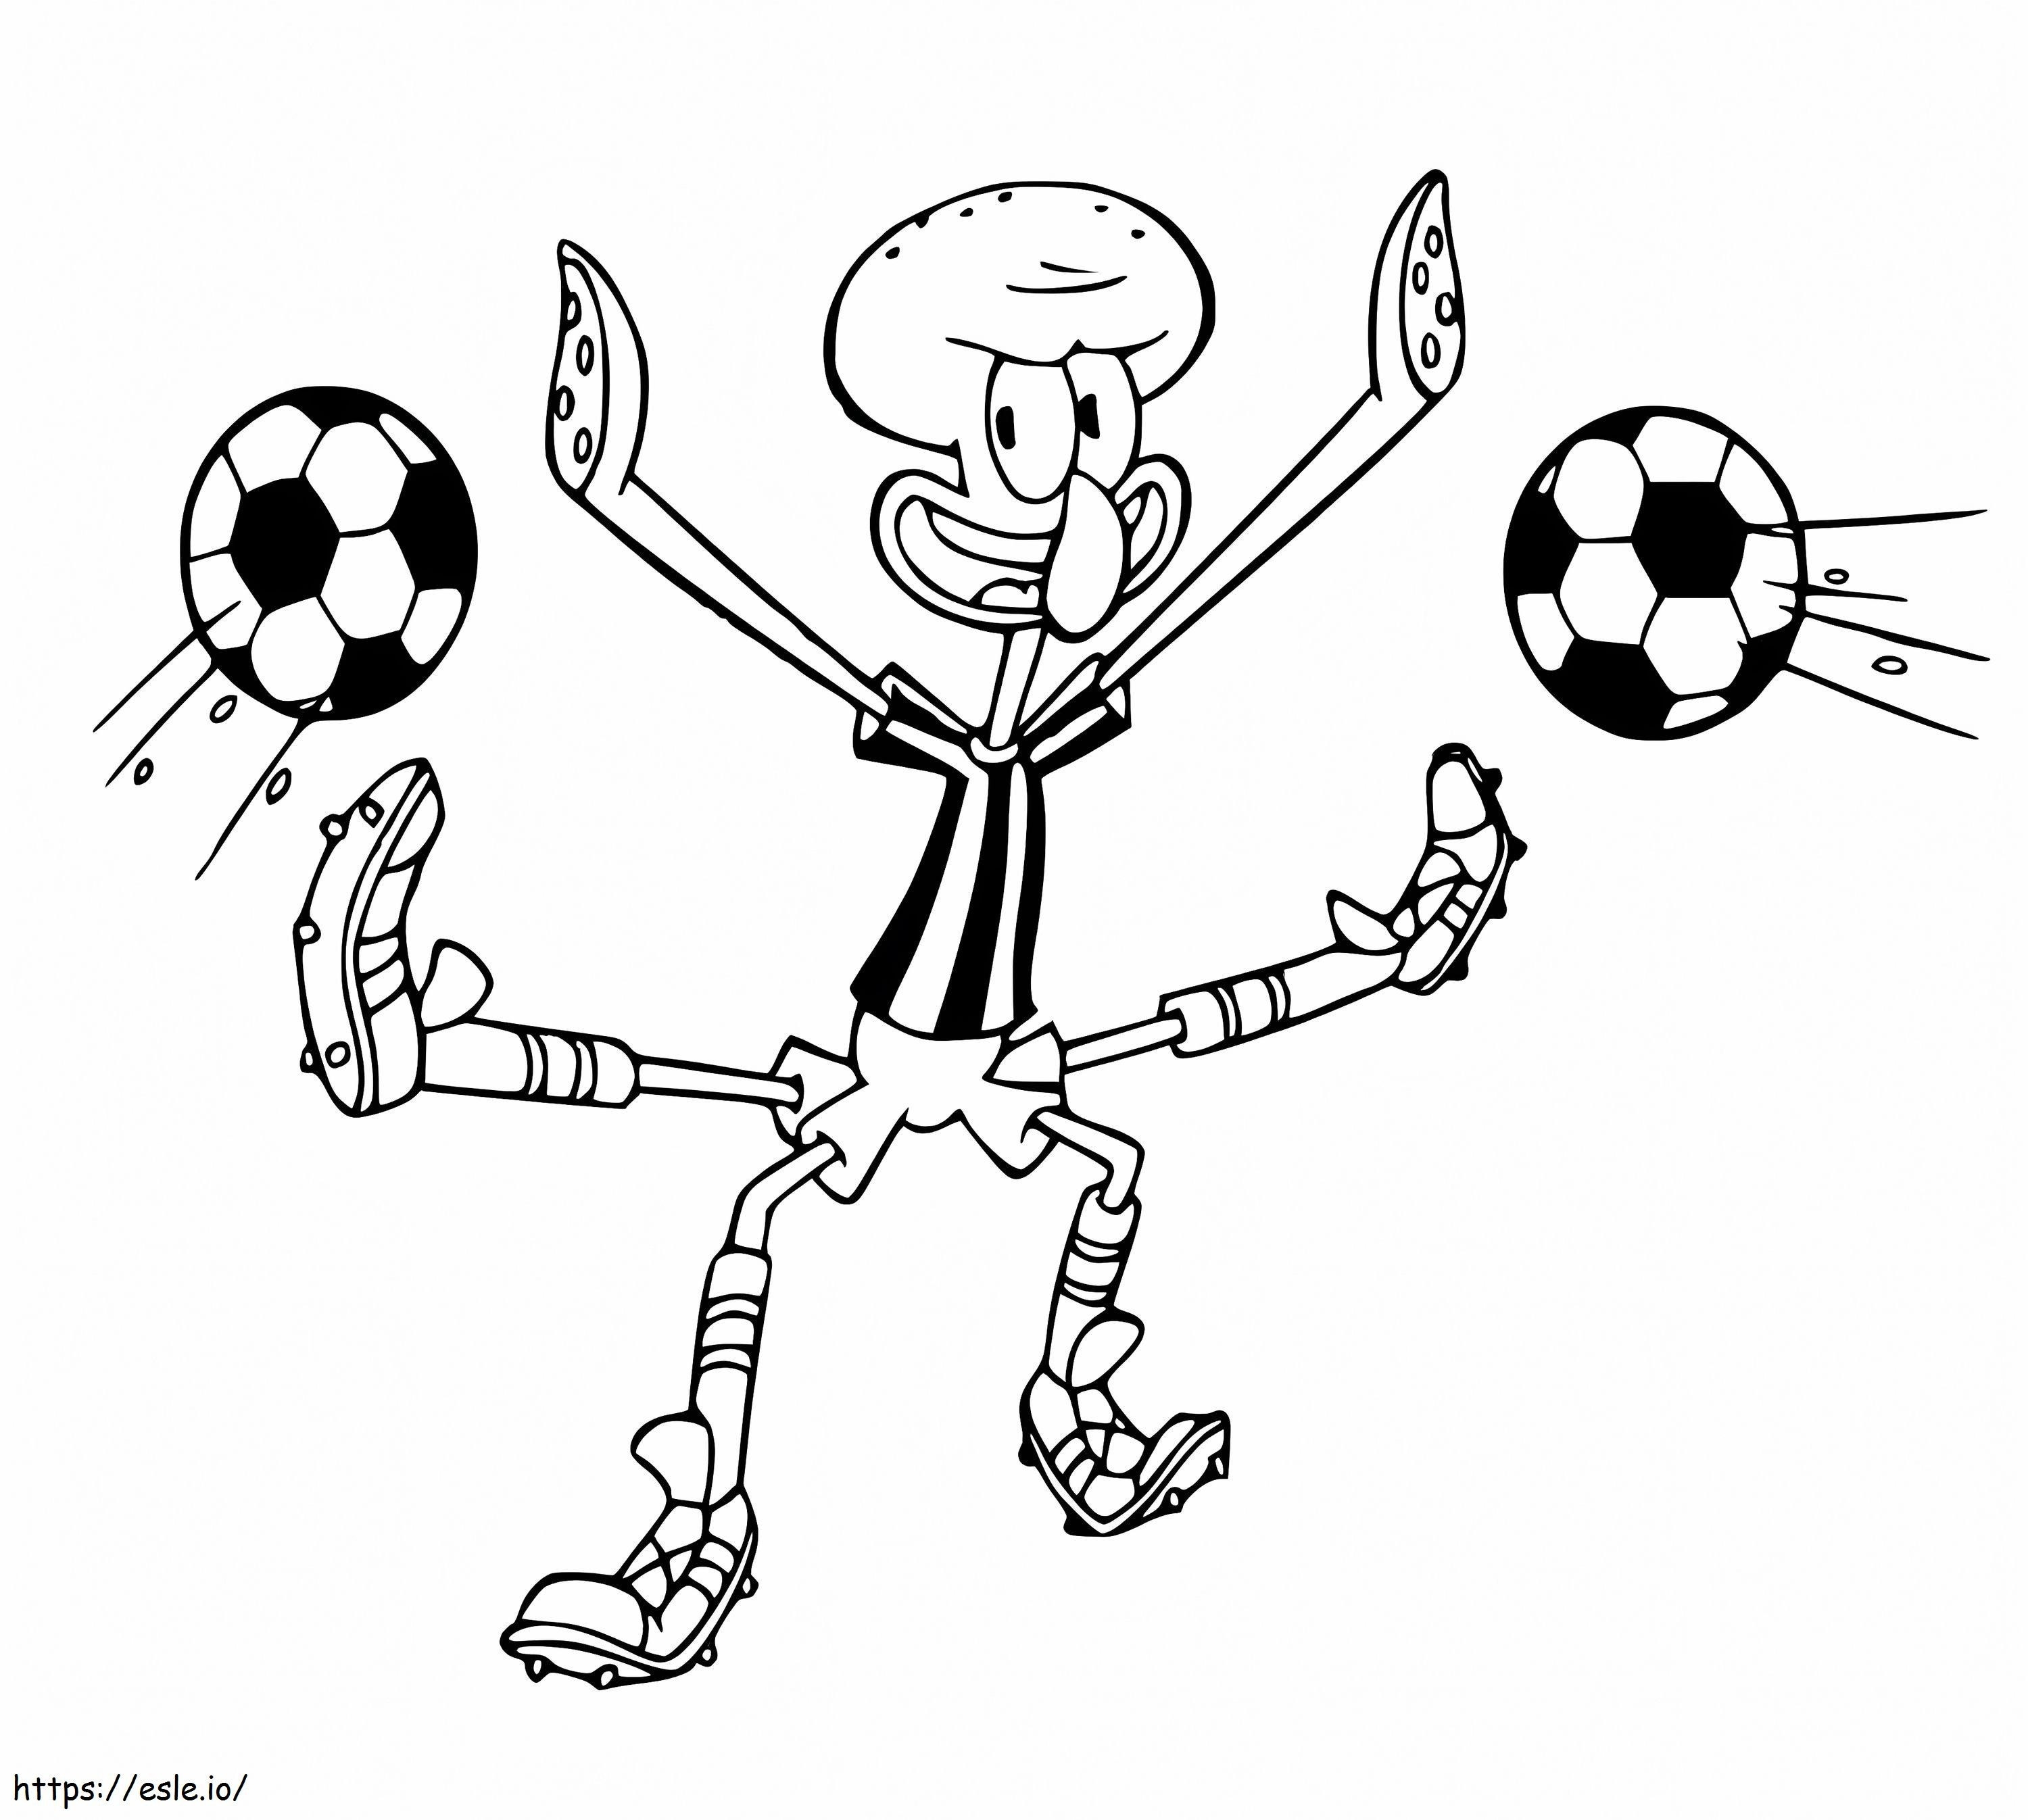 Squidward Playing Football coloring page